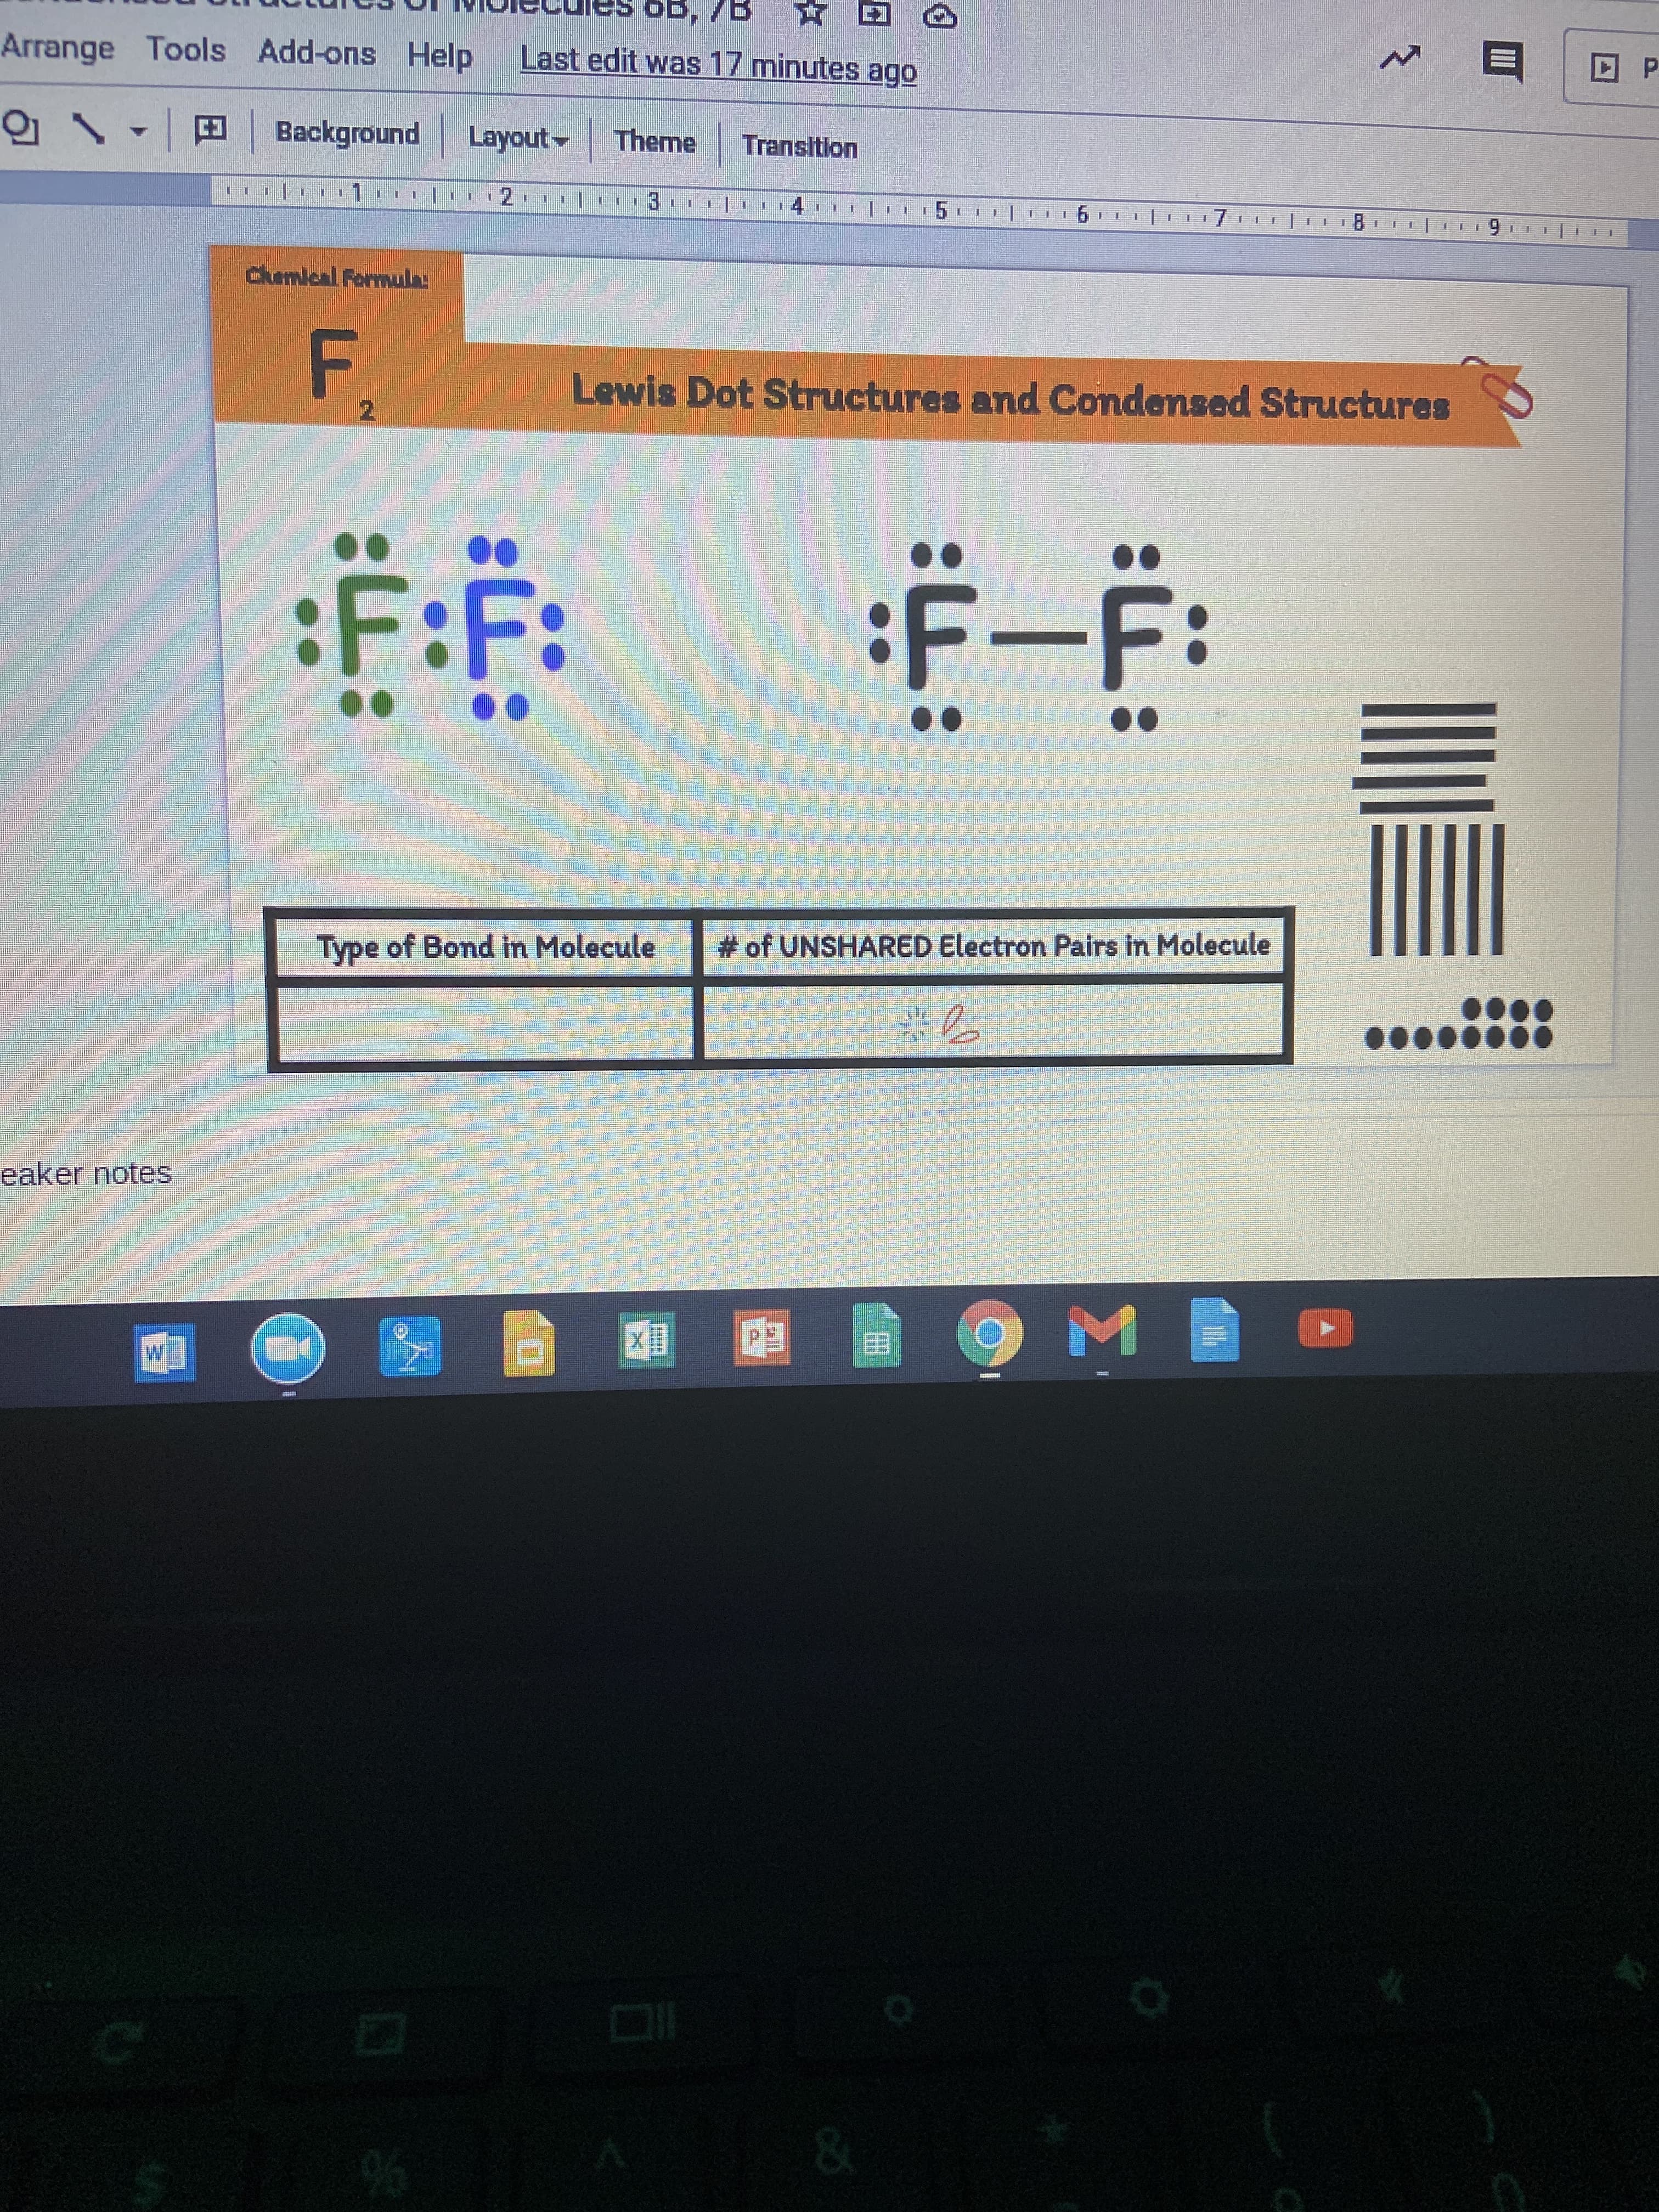 Chemical Formula:
Lewis Dot Structures and Condensed Structures
